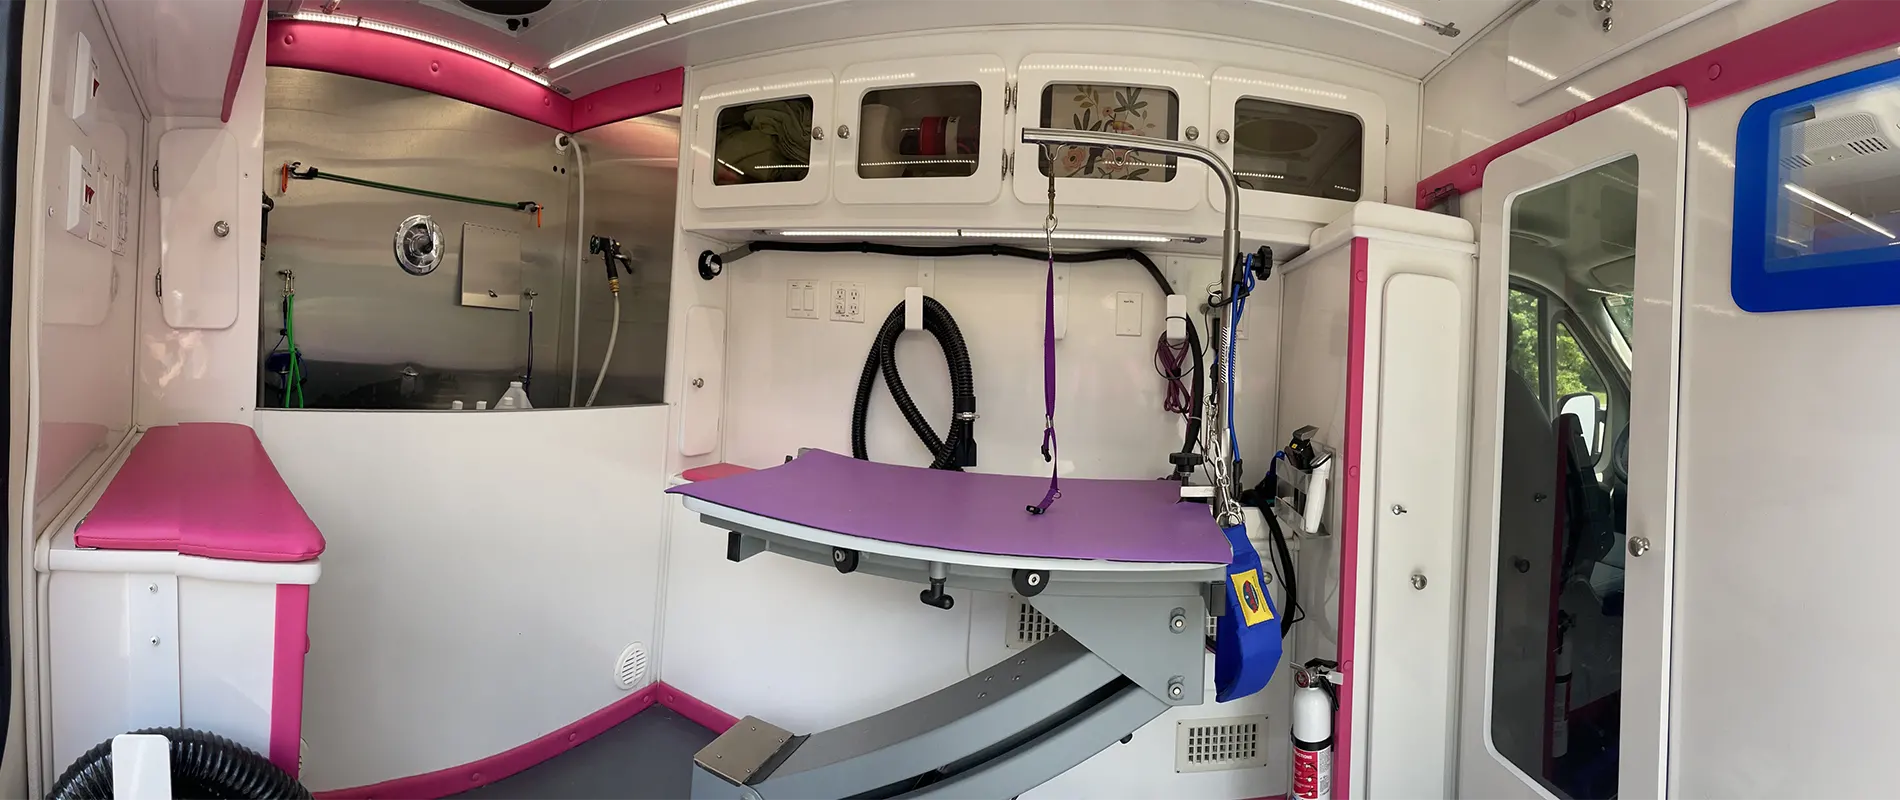 Wide Angle view of the interior of the Green Dog Mobile Spa Van showing the elevated Bathing sink, Clipping and Drying work station as well as general countertop